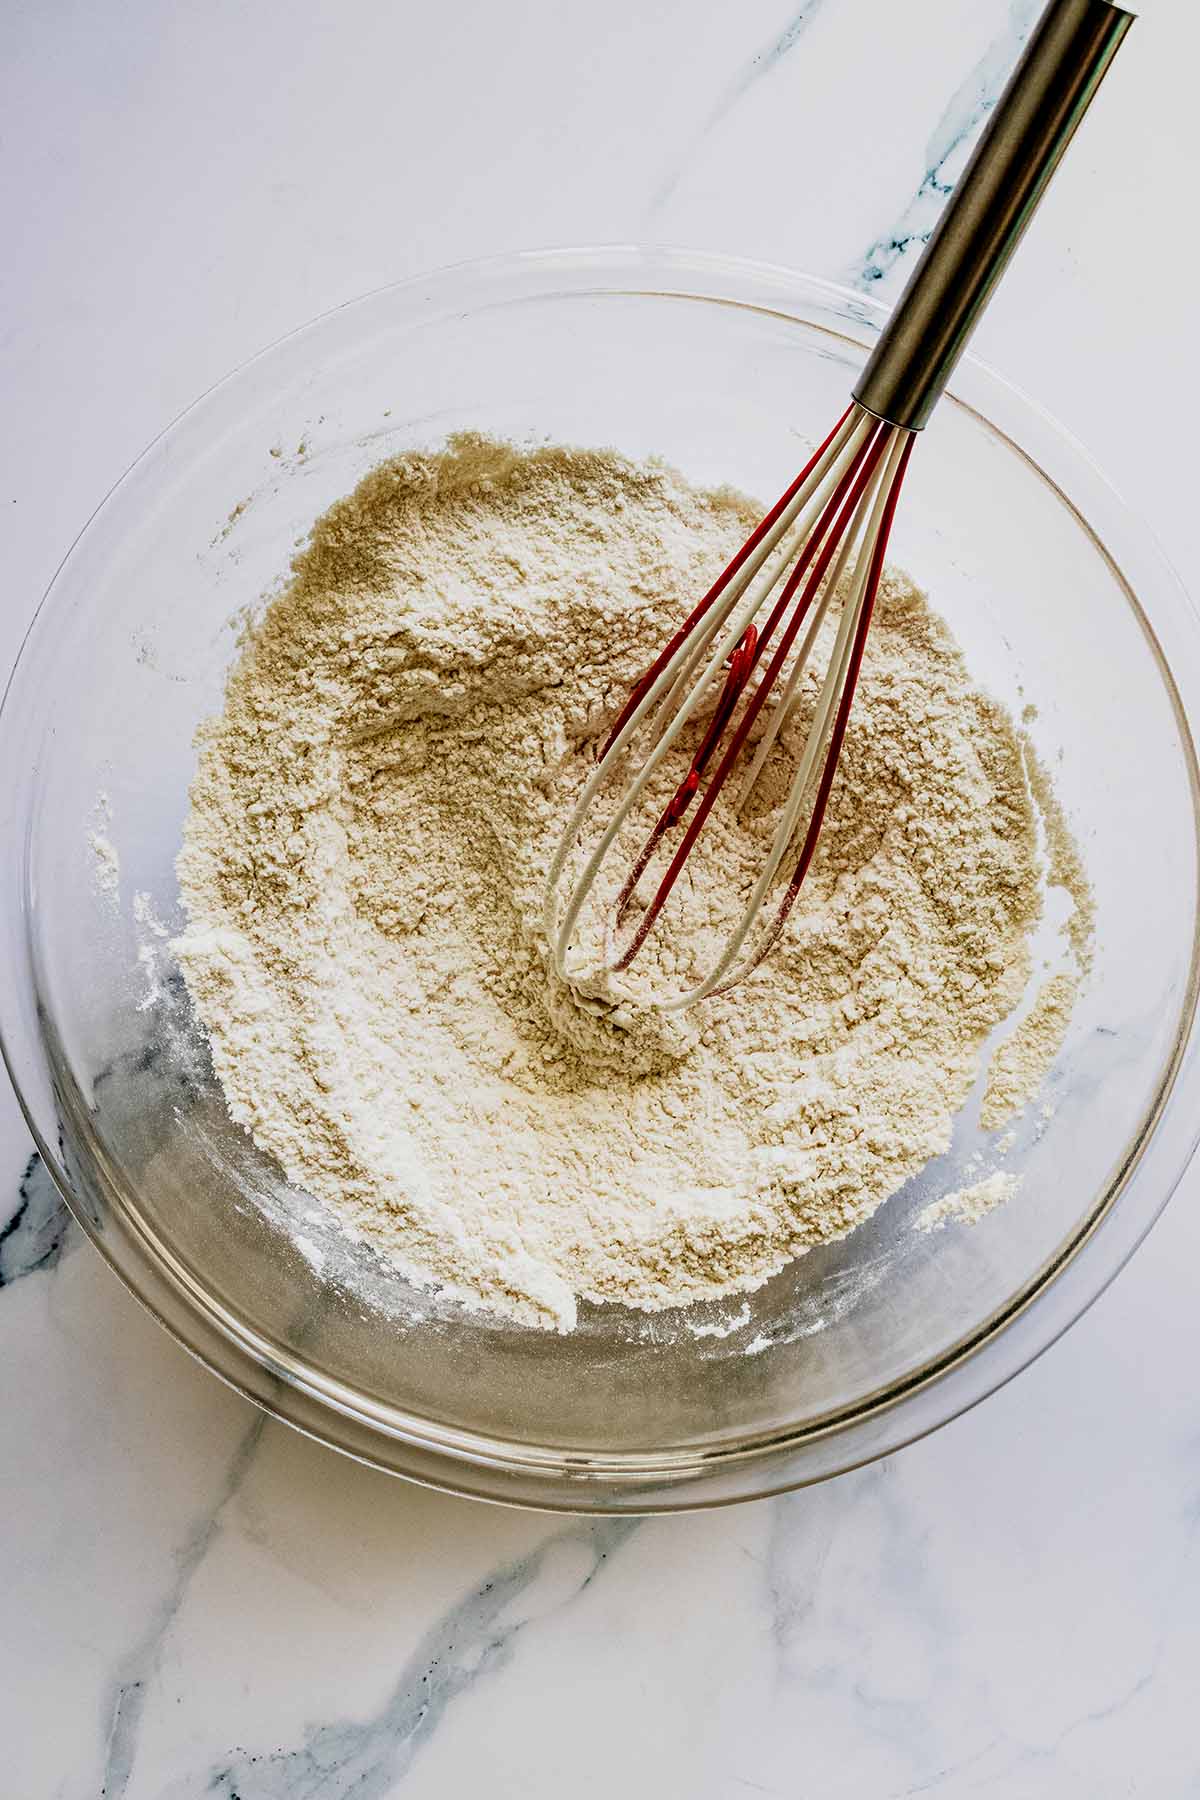 Dry ingredients in a glass bowl with a whisk